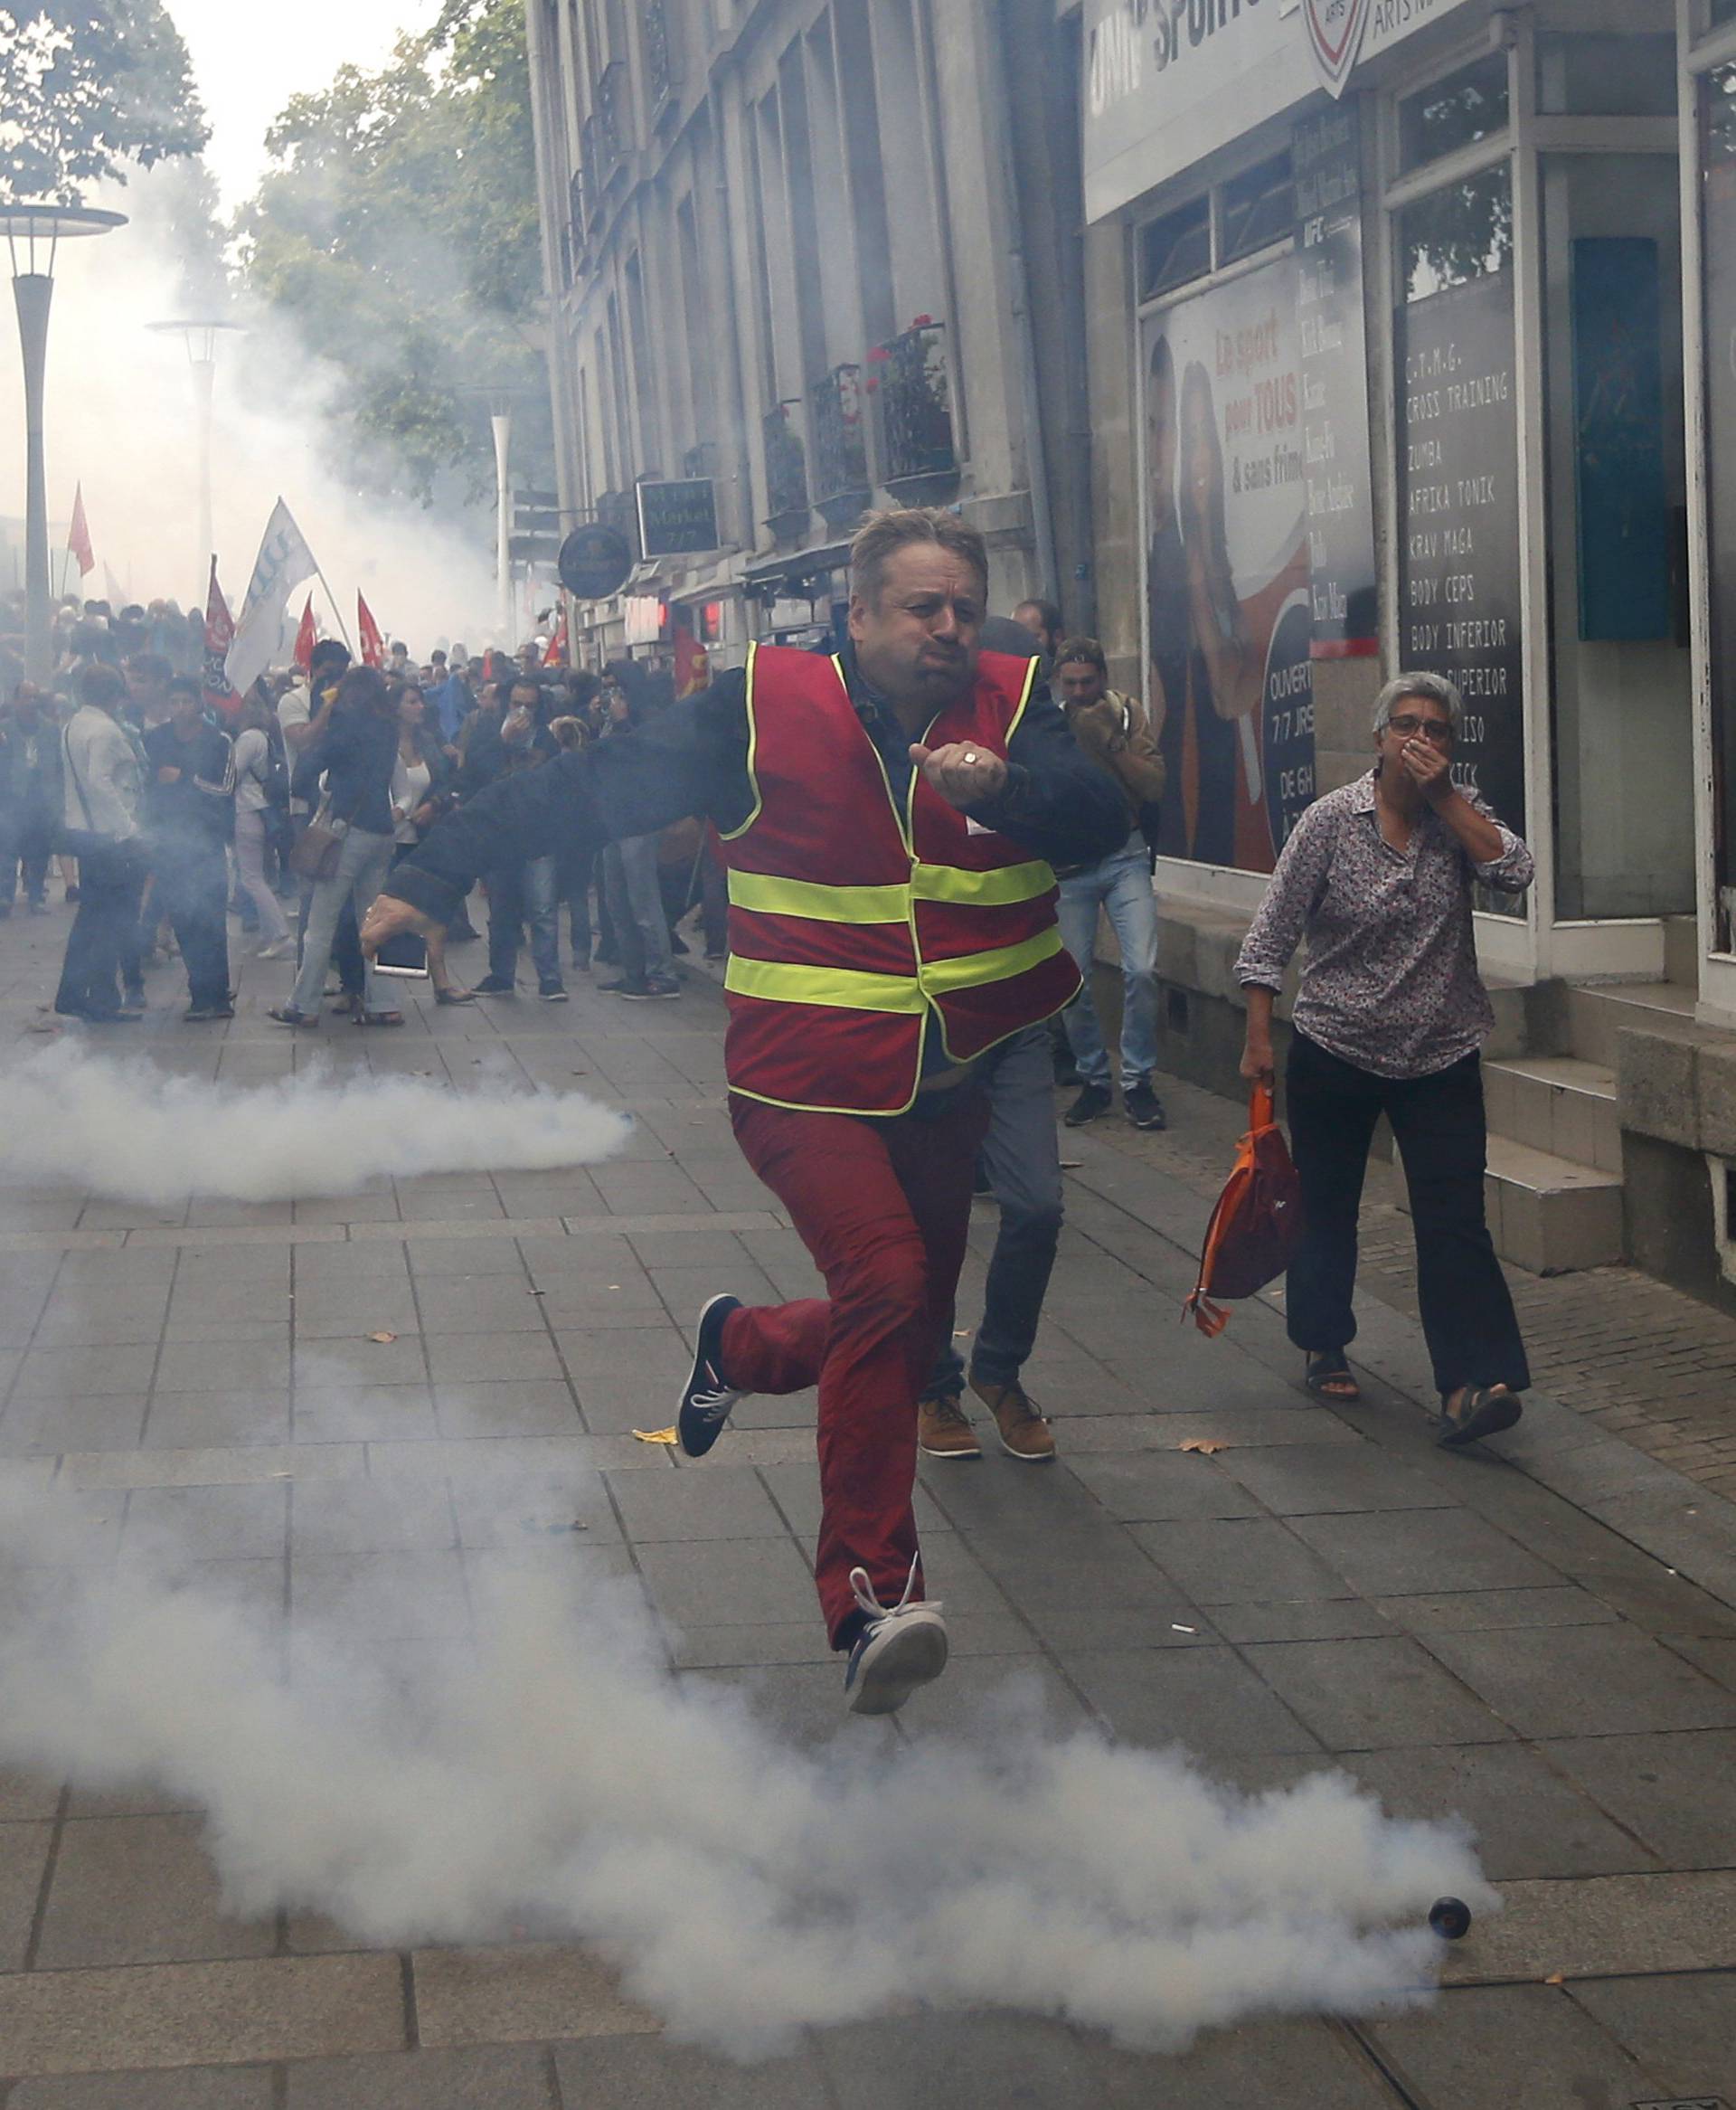 A man runs away from tear gas during clashes with French riot police at a march in Nantes, western France, to demonstrate against the new French labour law